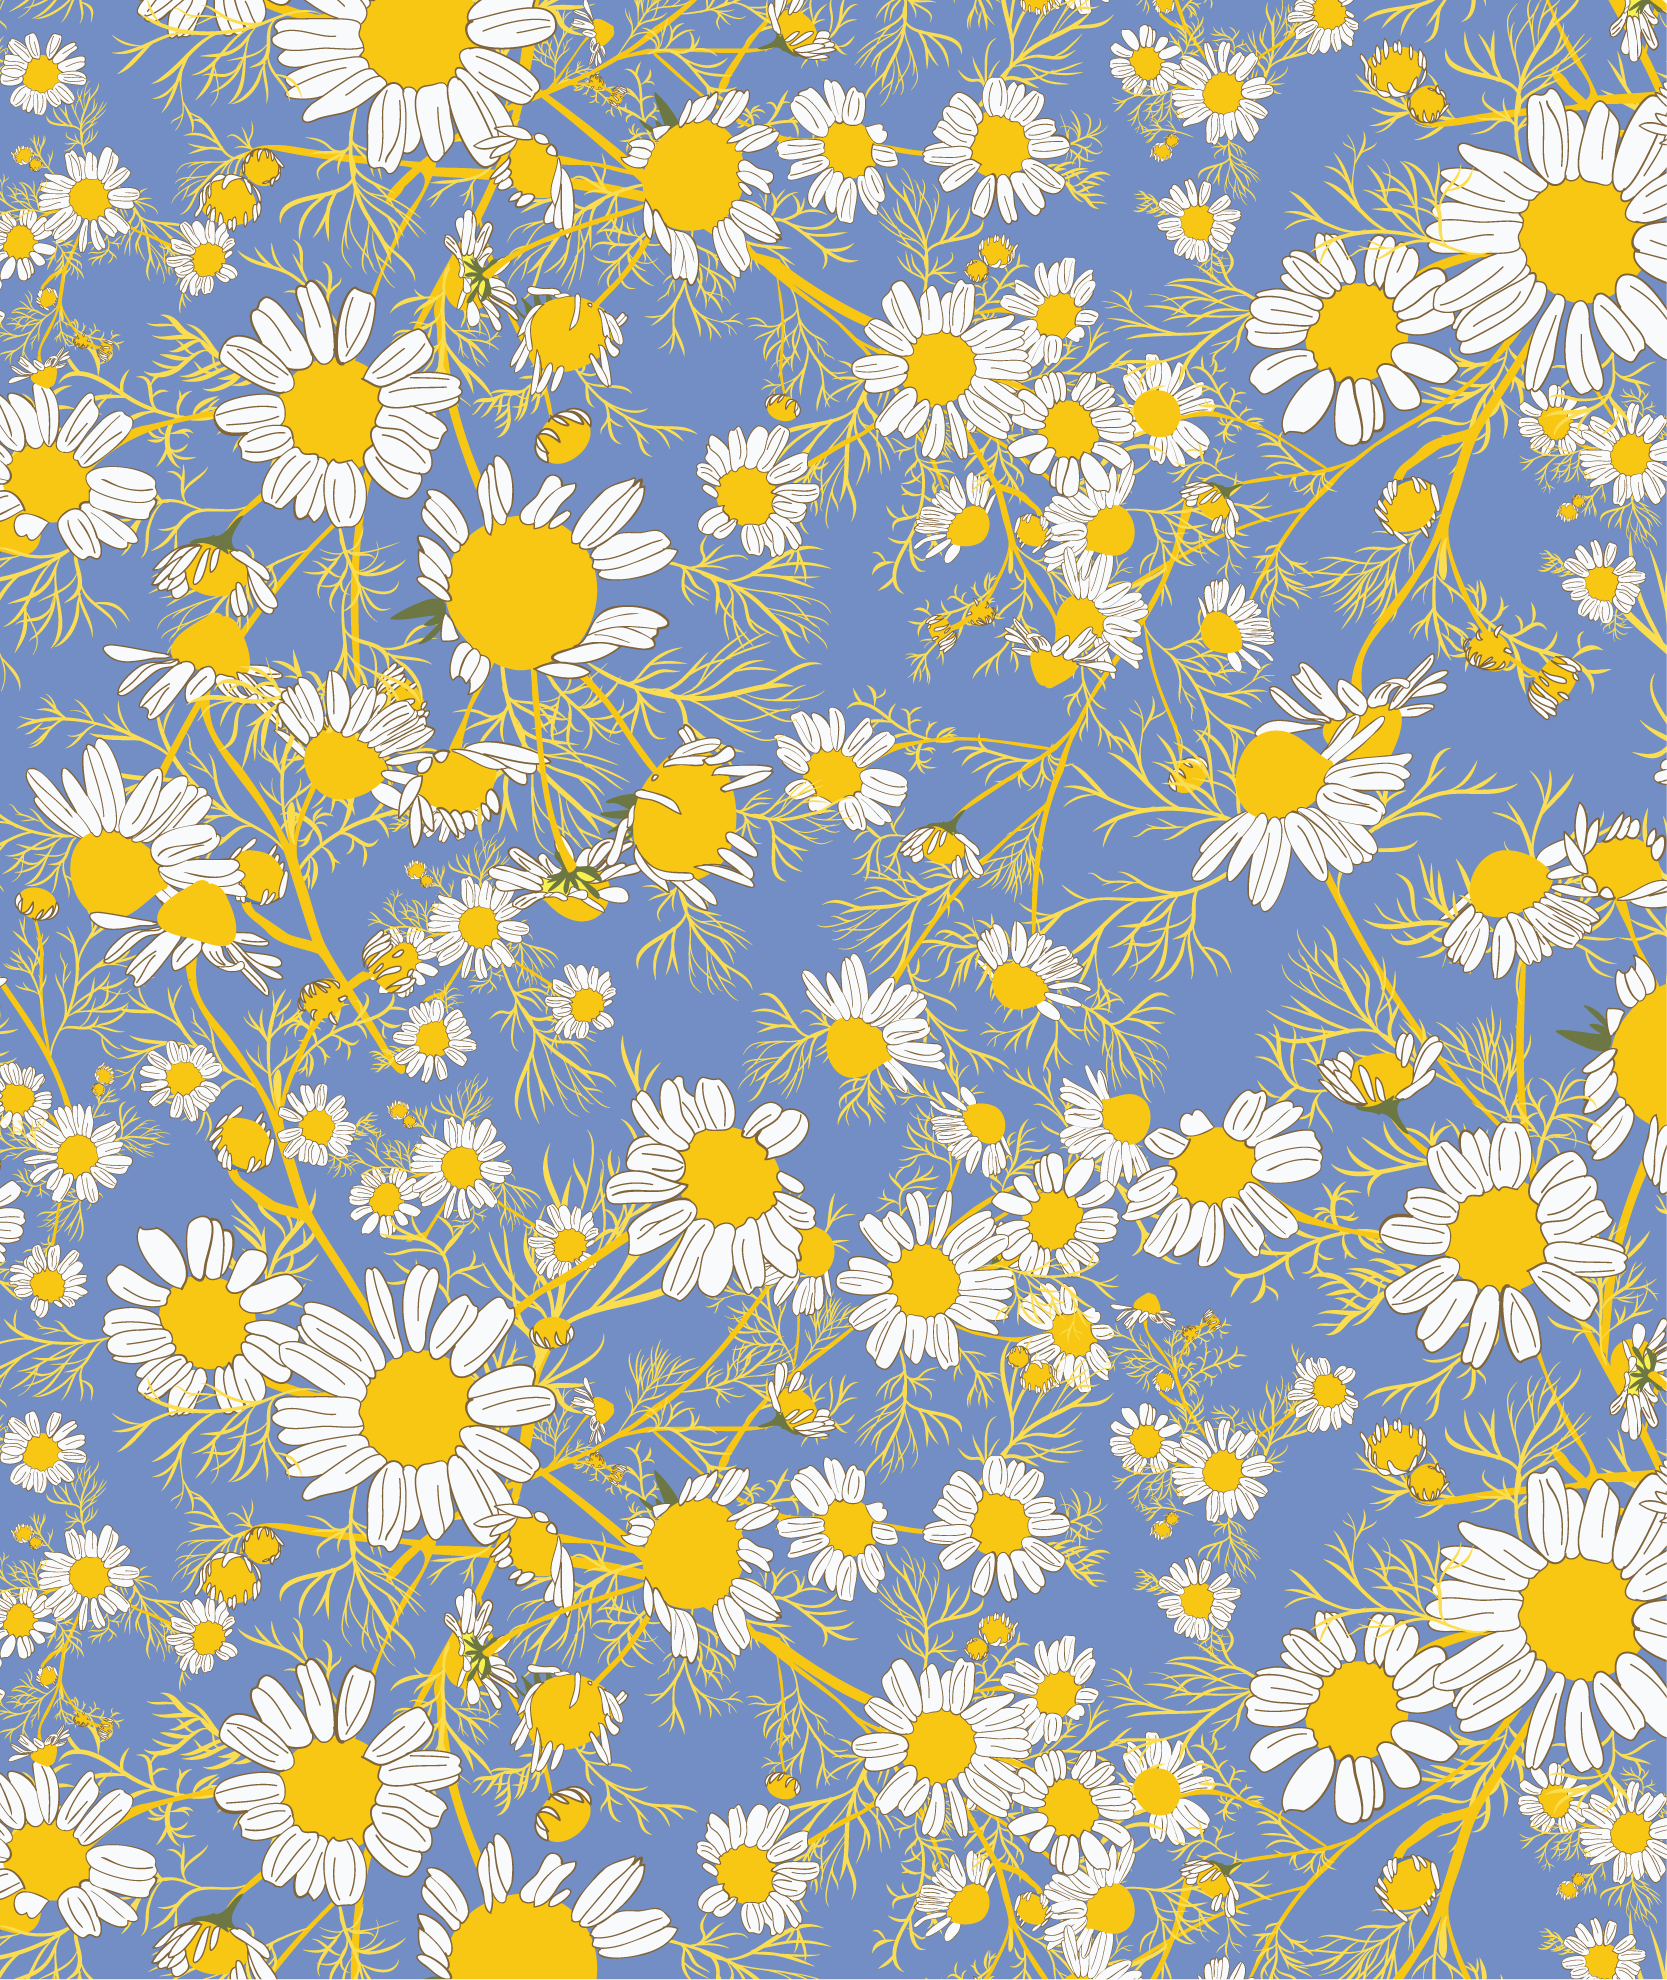 Chamomile in blue and yellow - Magical Weeds collection